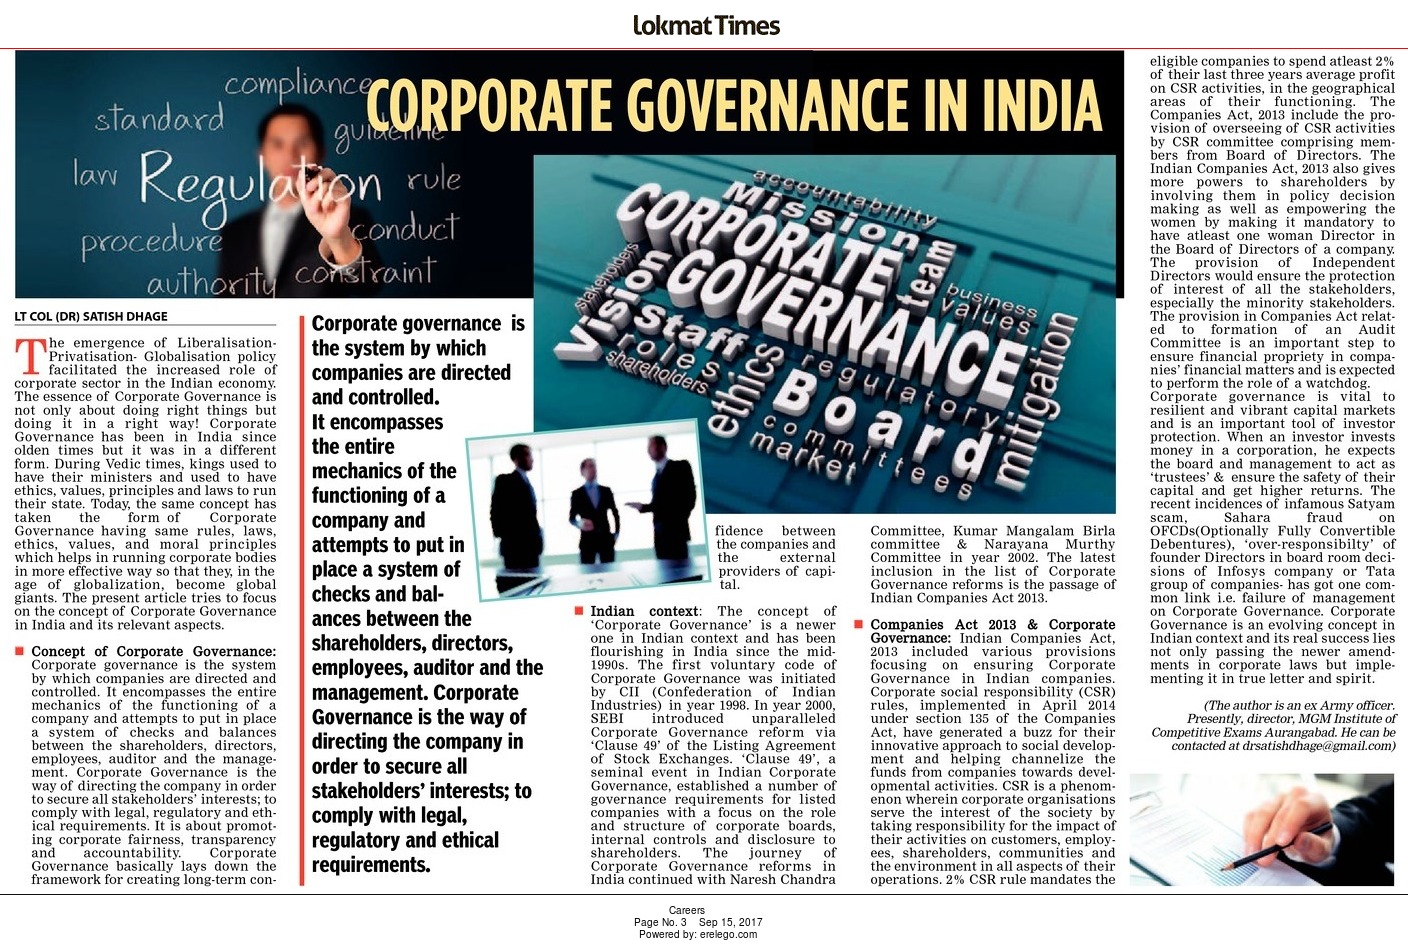 corporate-governance-in-india-in-lokmat-times-dt-15-sep-2017...